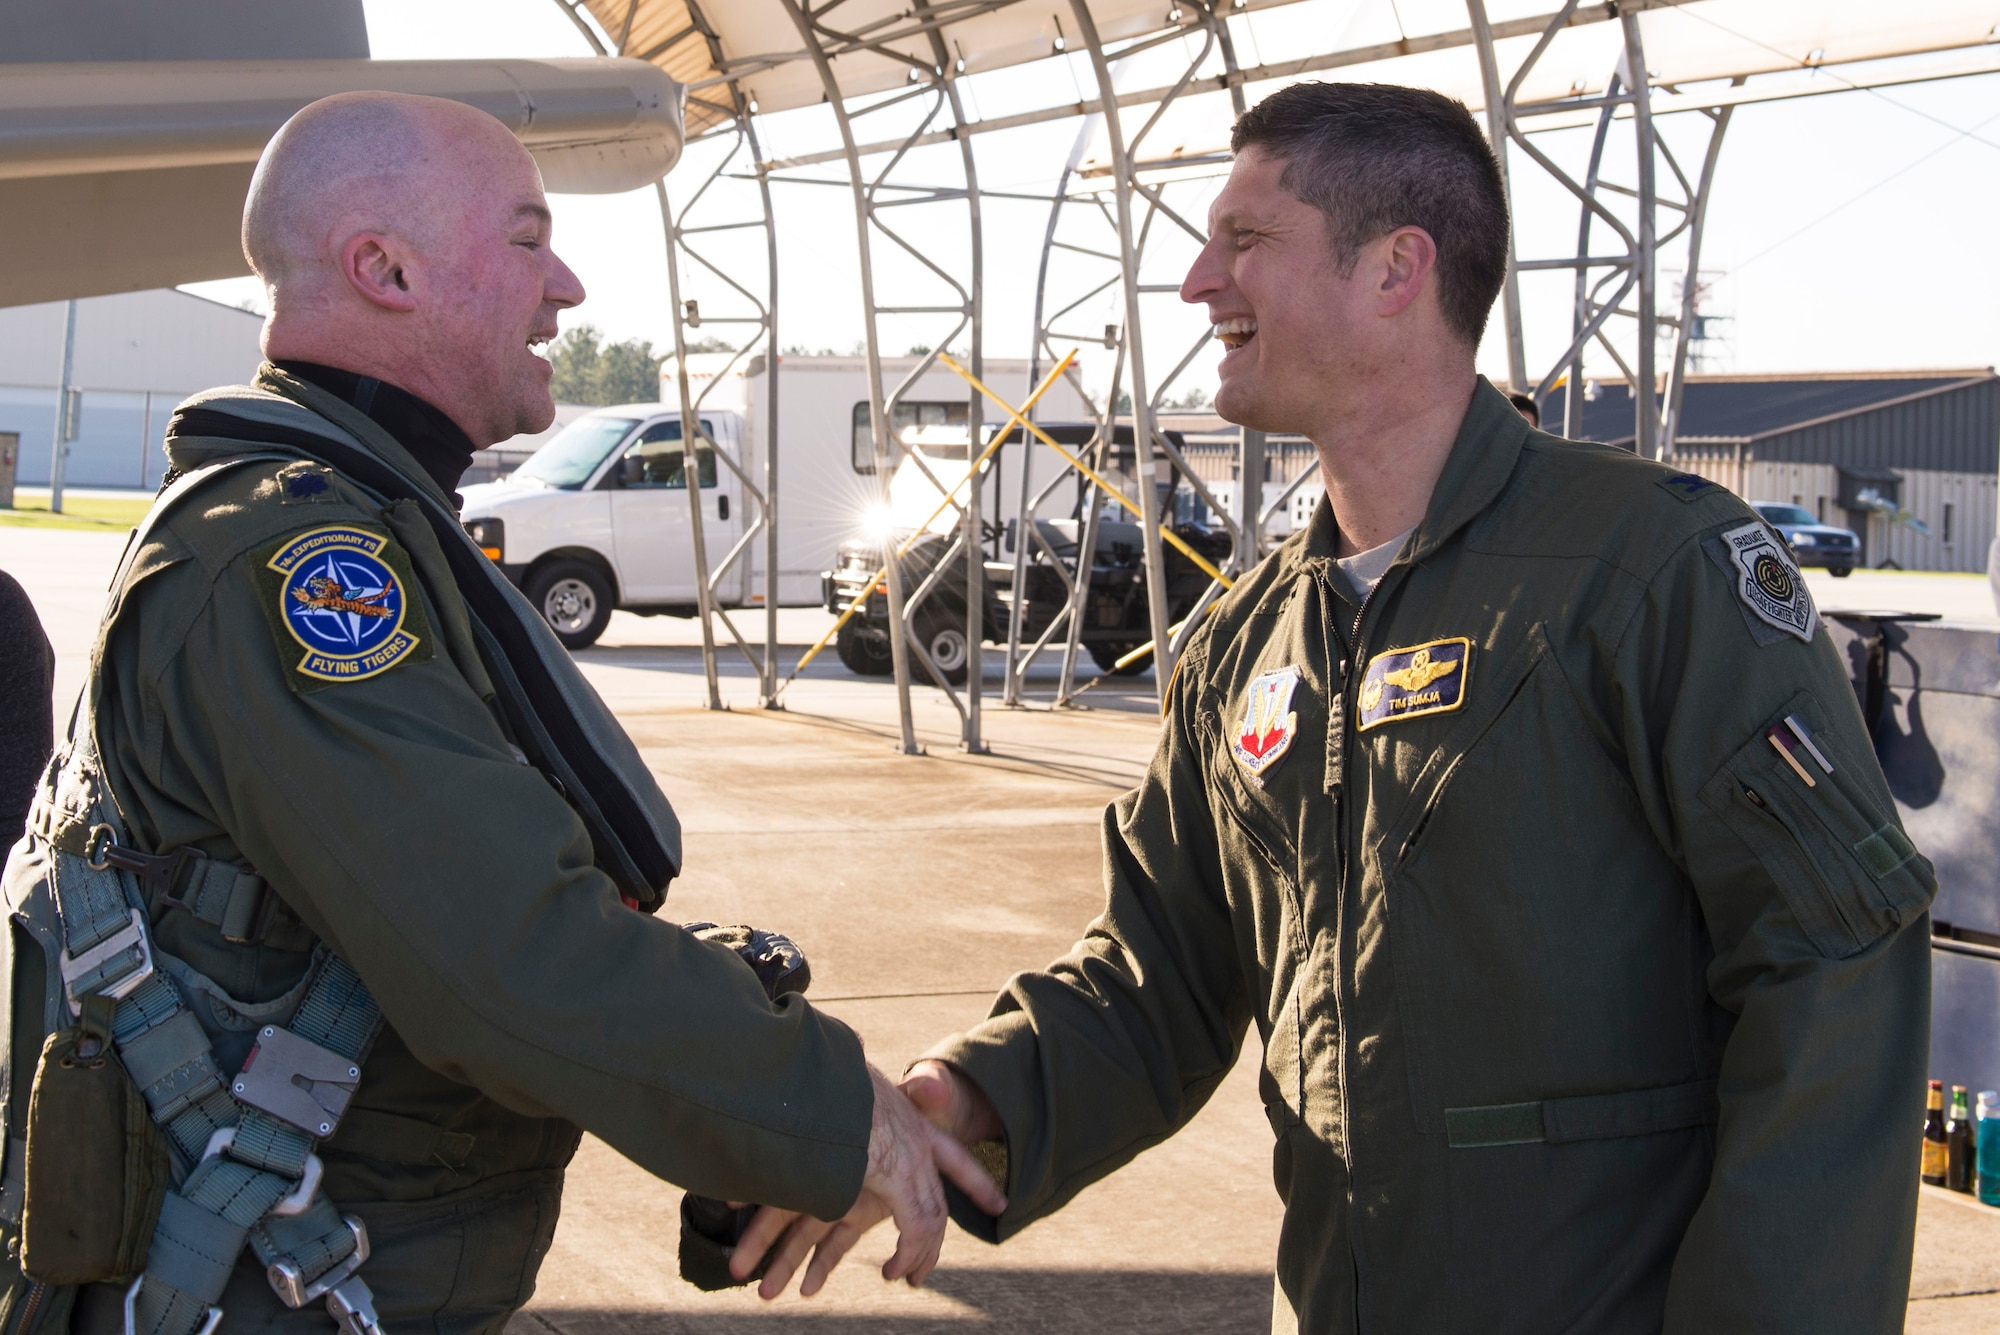 U.S. Air Force Col. Timothy Sumja, 23d Fighter Group commander, greets Lt. Col. Bryan France, 74th Expeditionary Fighter Squadron commander, as he returns from a deployment, March 21, 2016, at Moody Air Force Base, Ga. The 74th EFS deployed for six months to train alongside NATO allies to enhance correspondence and exhibit U.S. allegiance in the safeguarding and steadfastness of Europe. (U.S. Air Force photo by Airman 1st Class Greg Nash/Released) 